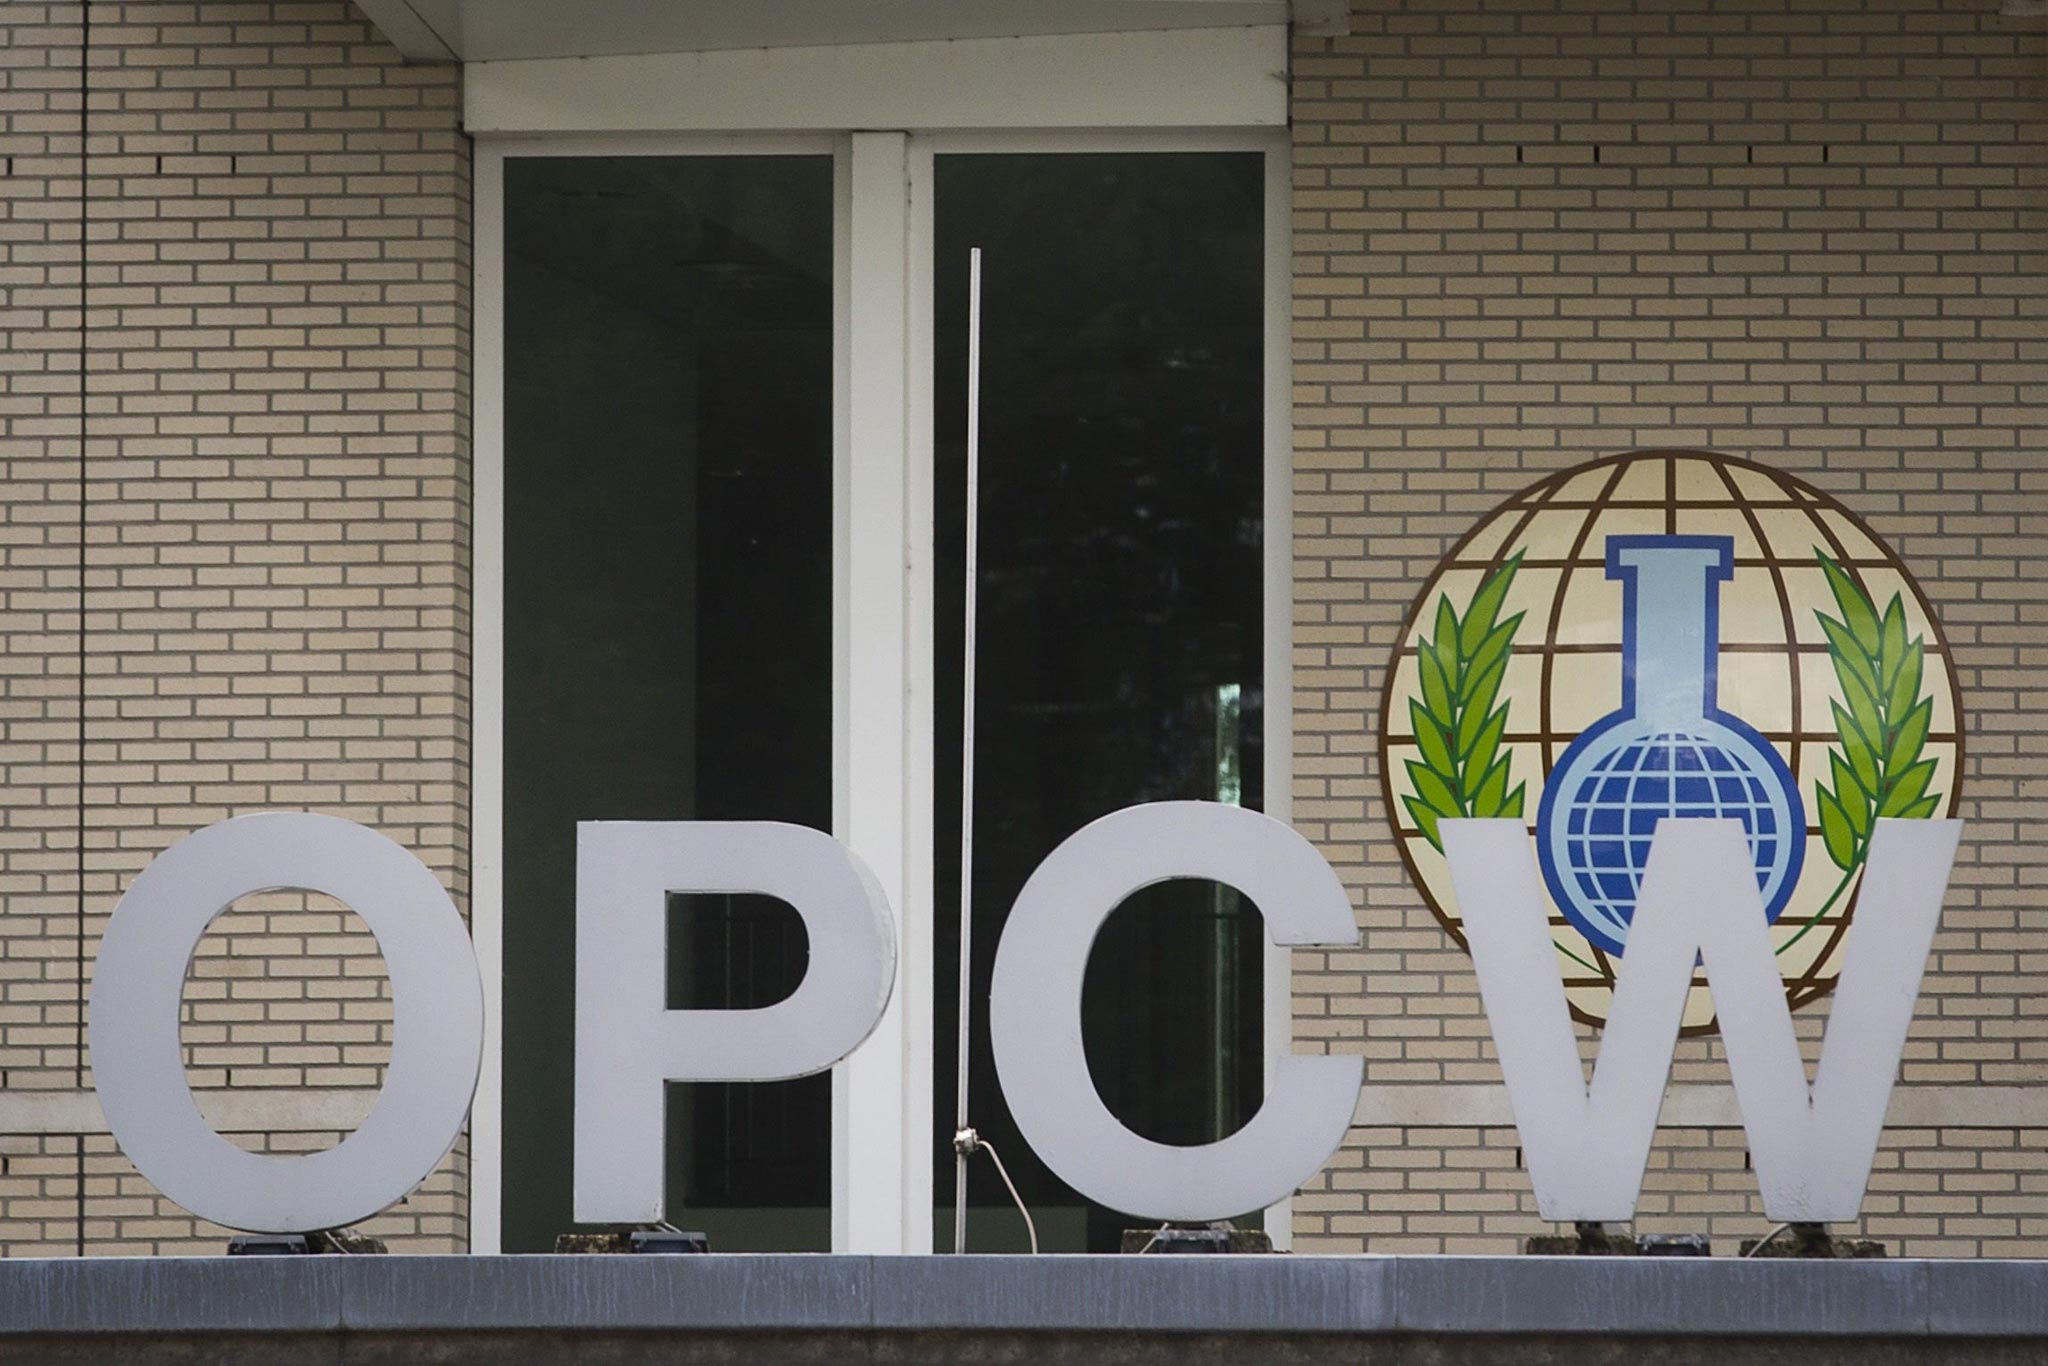 The Organization for the Prohibition of Chemical Weapons' (OPCW) building in The Hague, The Netherlands